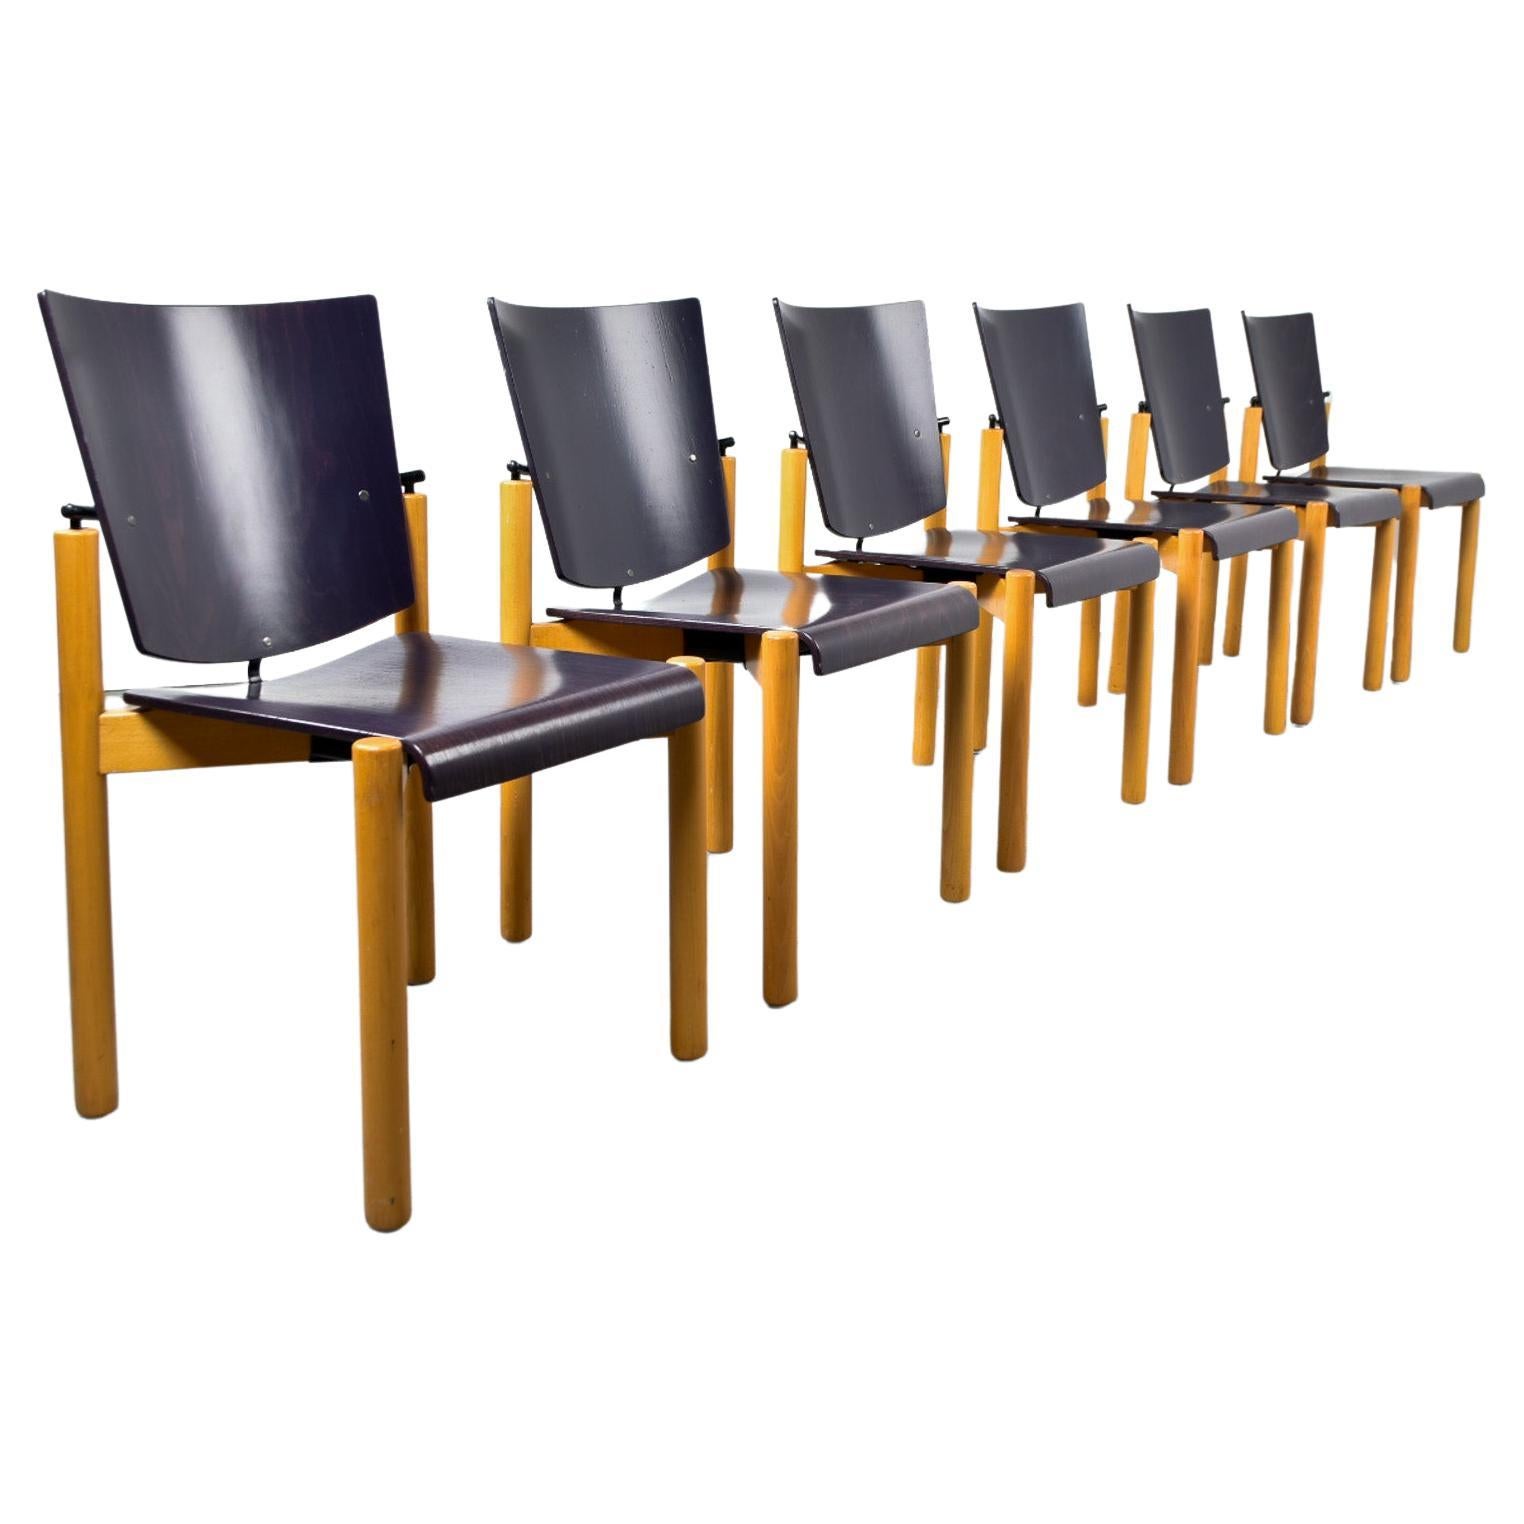 Kusch+Co Model 2400 chairs set of 6